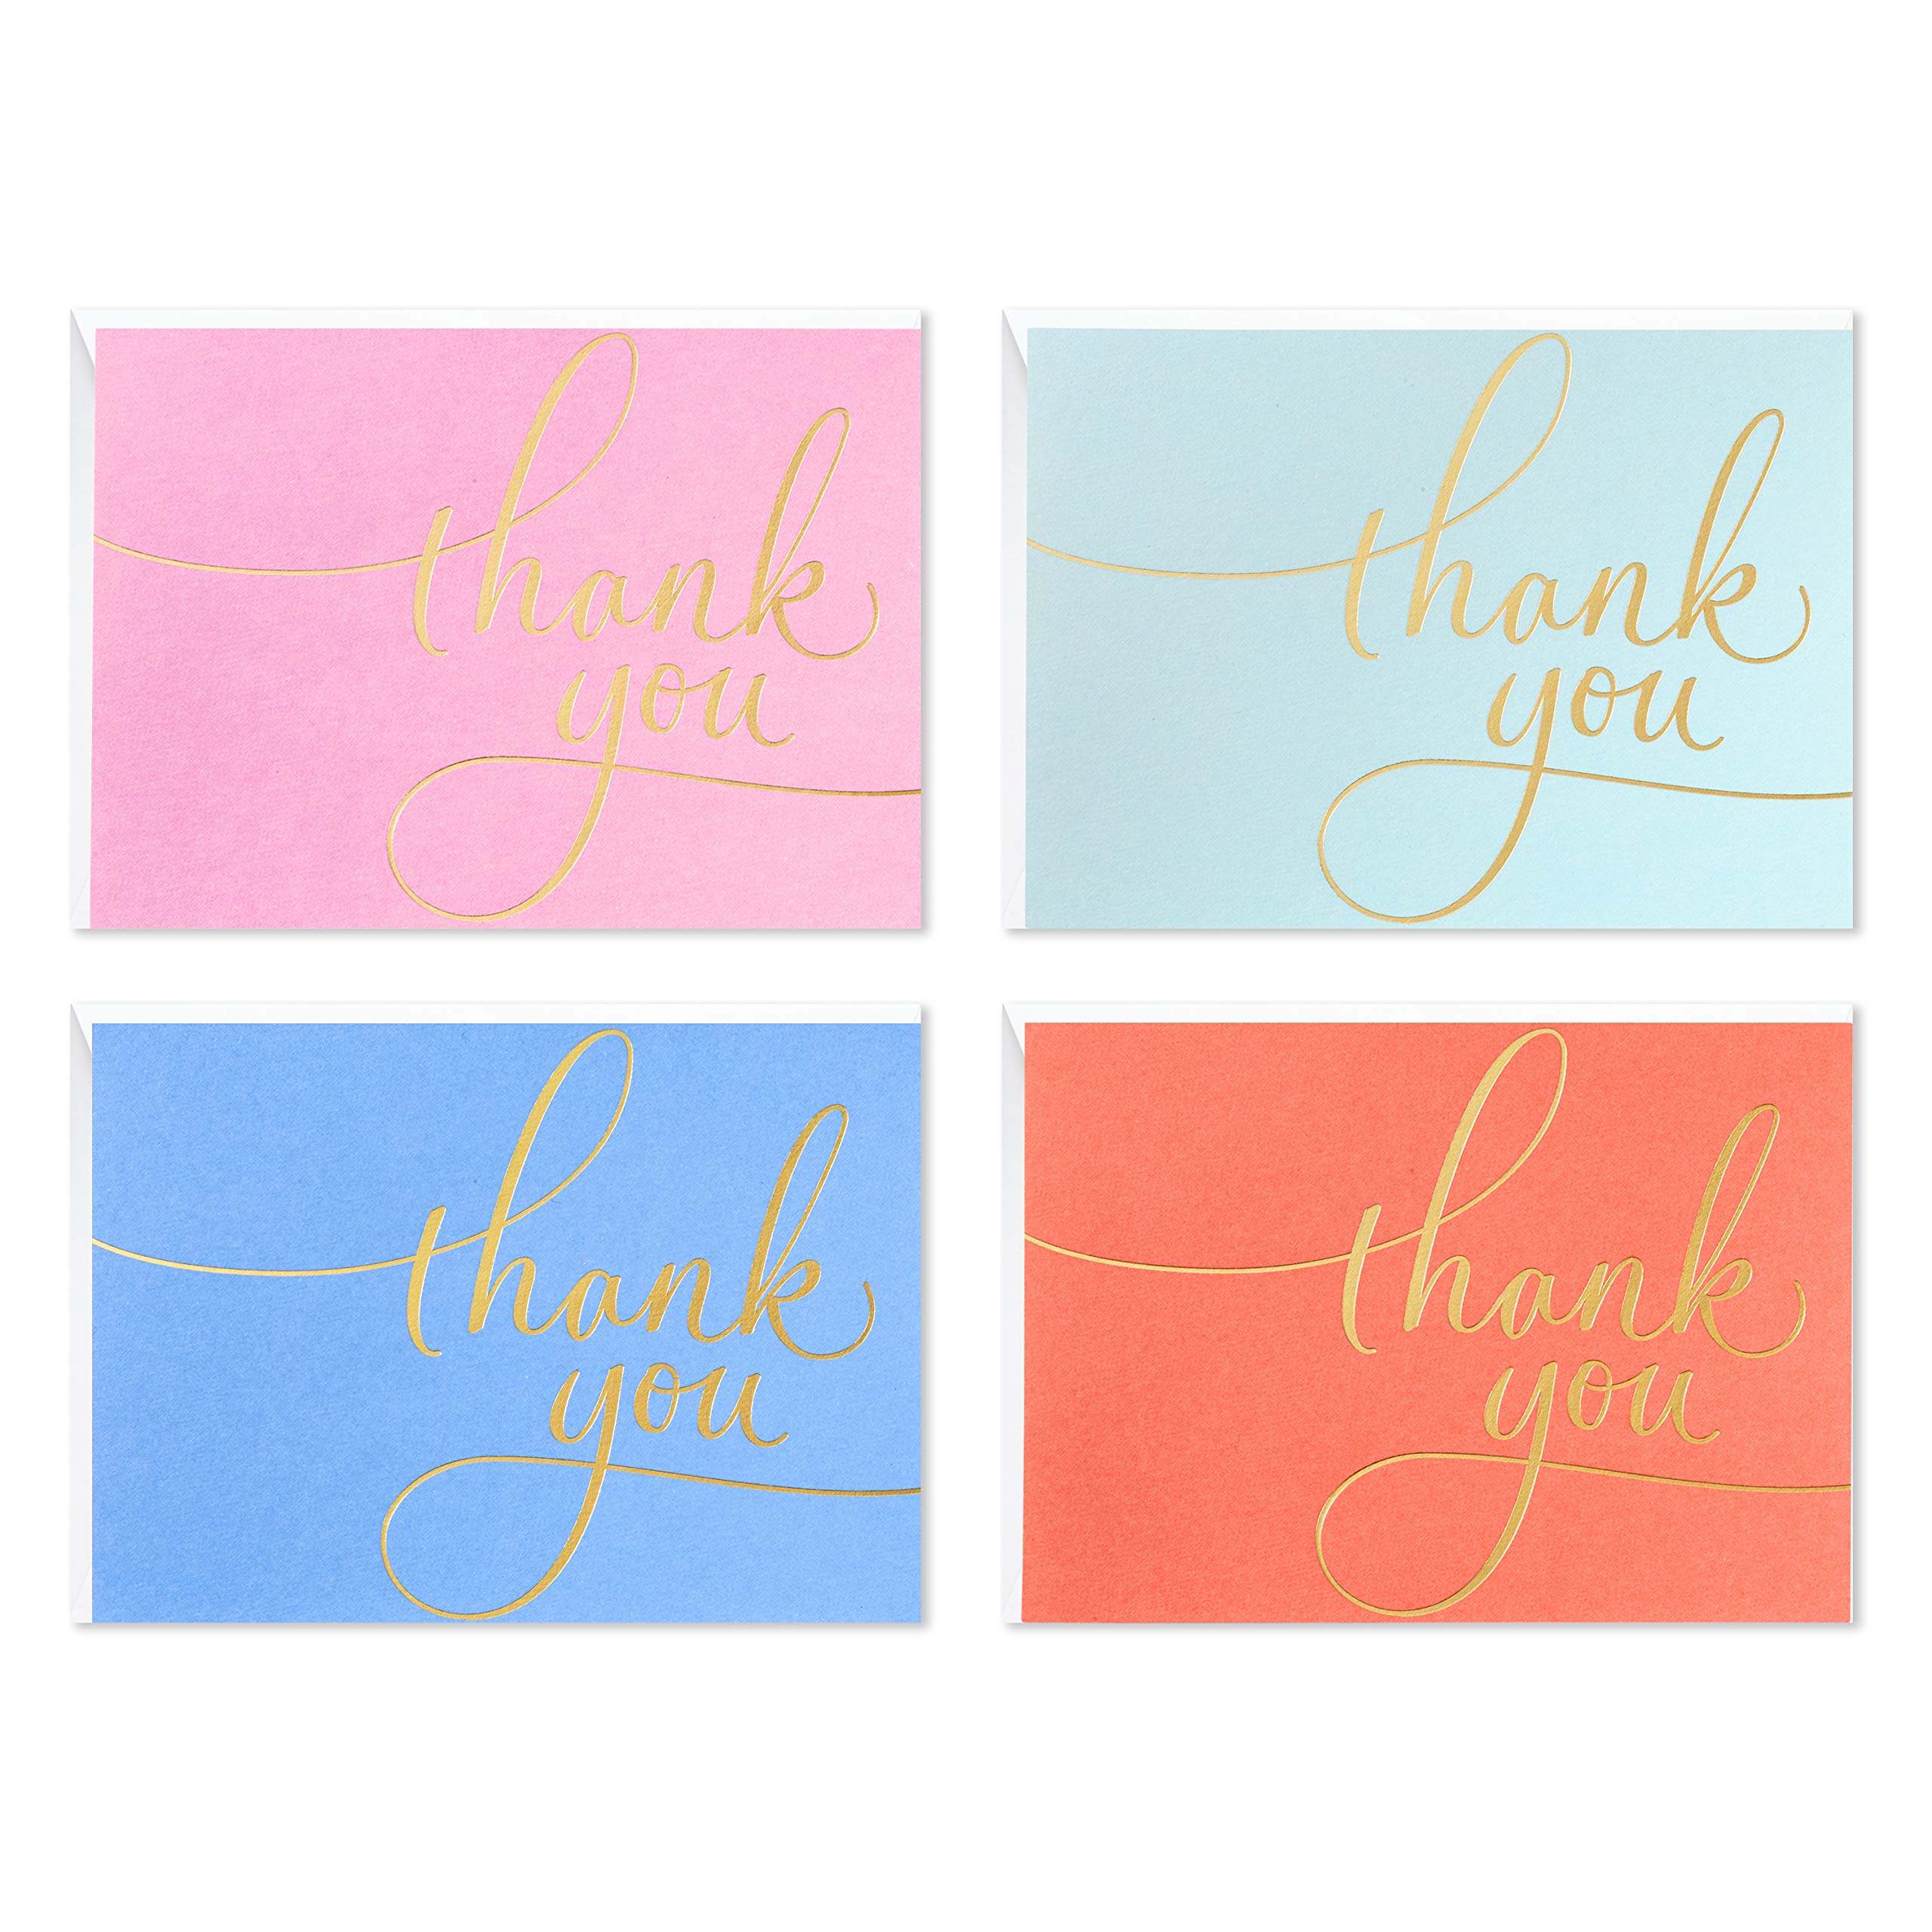 Hallmark Thank You Cards Assortment, Gold Foil Script (40 Thank You Notes with Envelopes) & Thank You Cards (Silver Foil Script, 40 Thank You Notes and Envelopes)